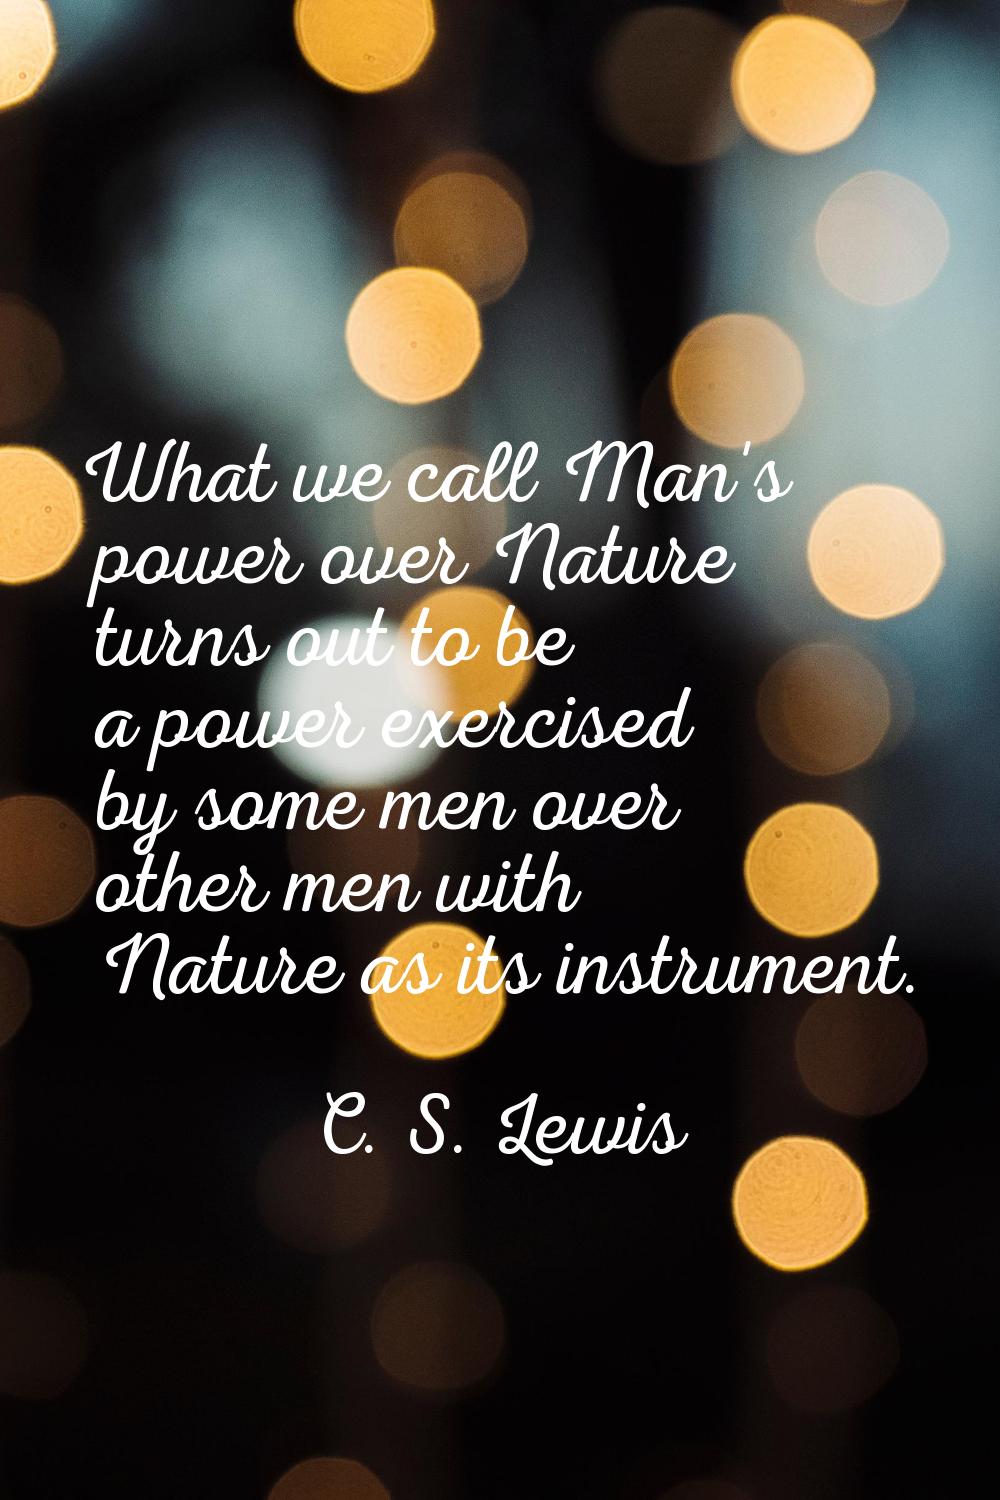 What we call Man's power over Nature turns out to be a power exercised by some men over other men w